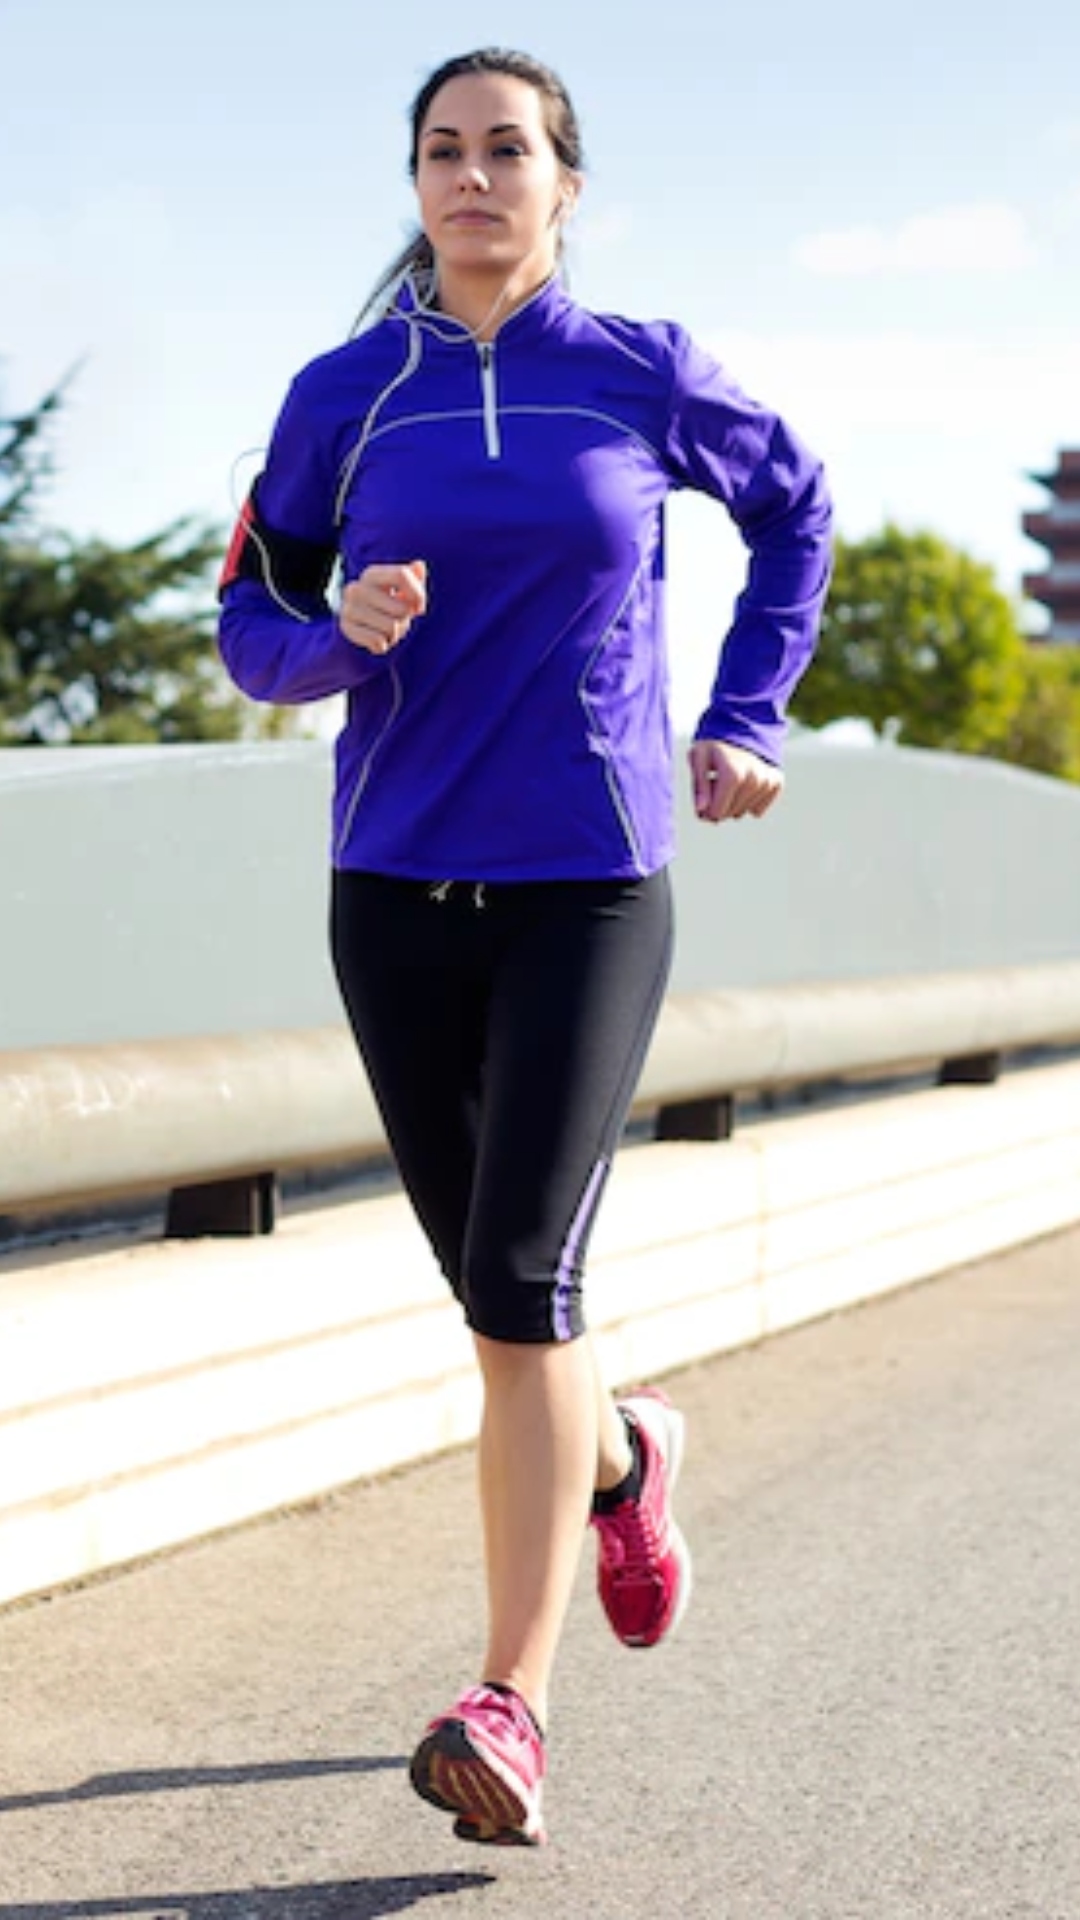  Know what are the benefits of brisk walking 